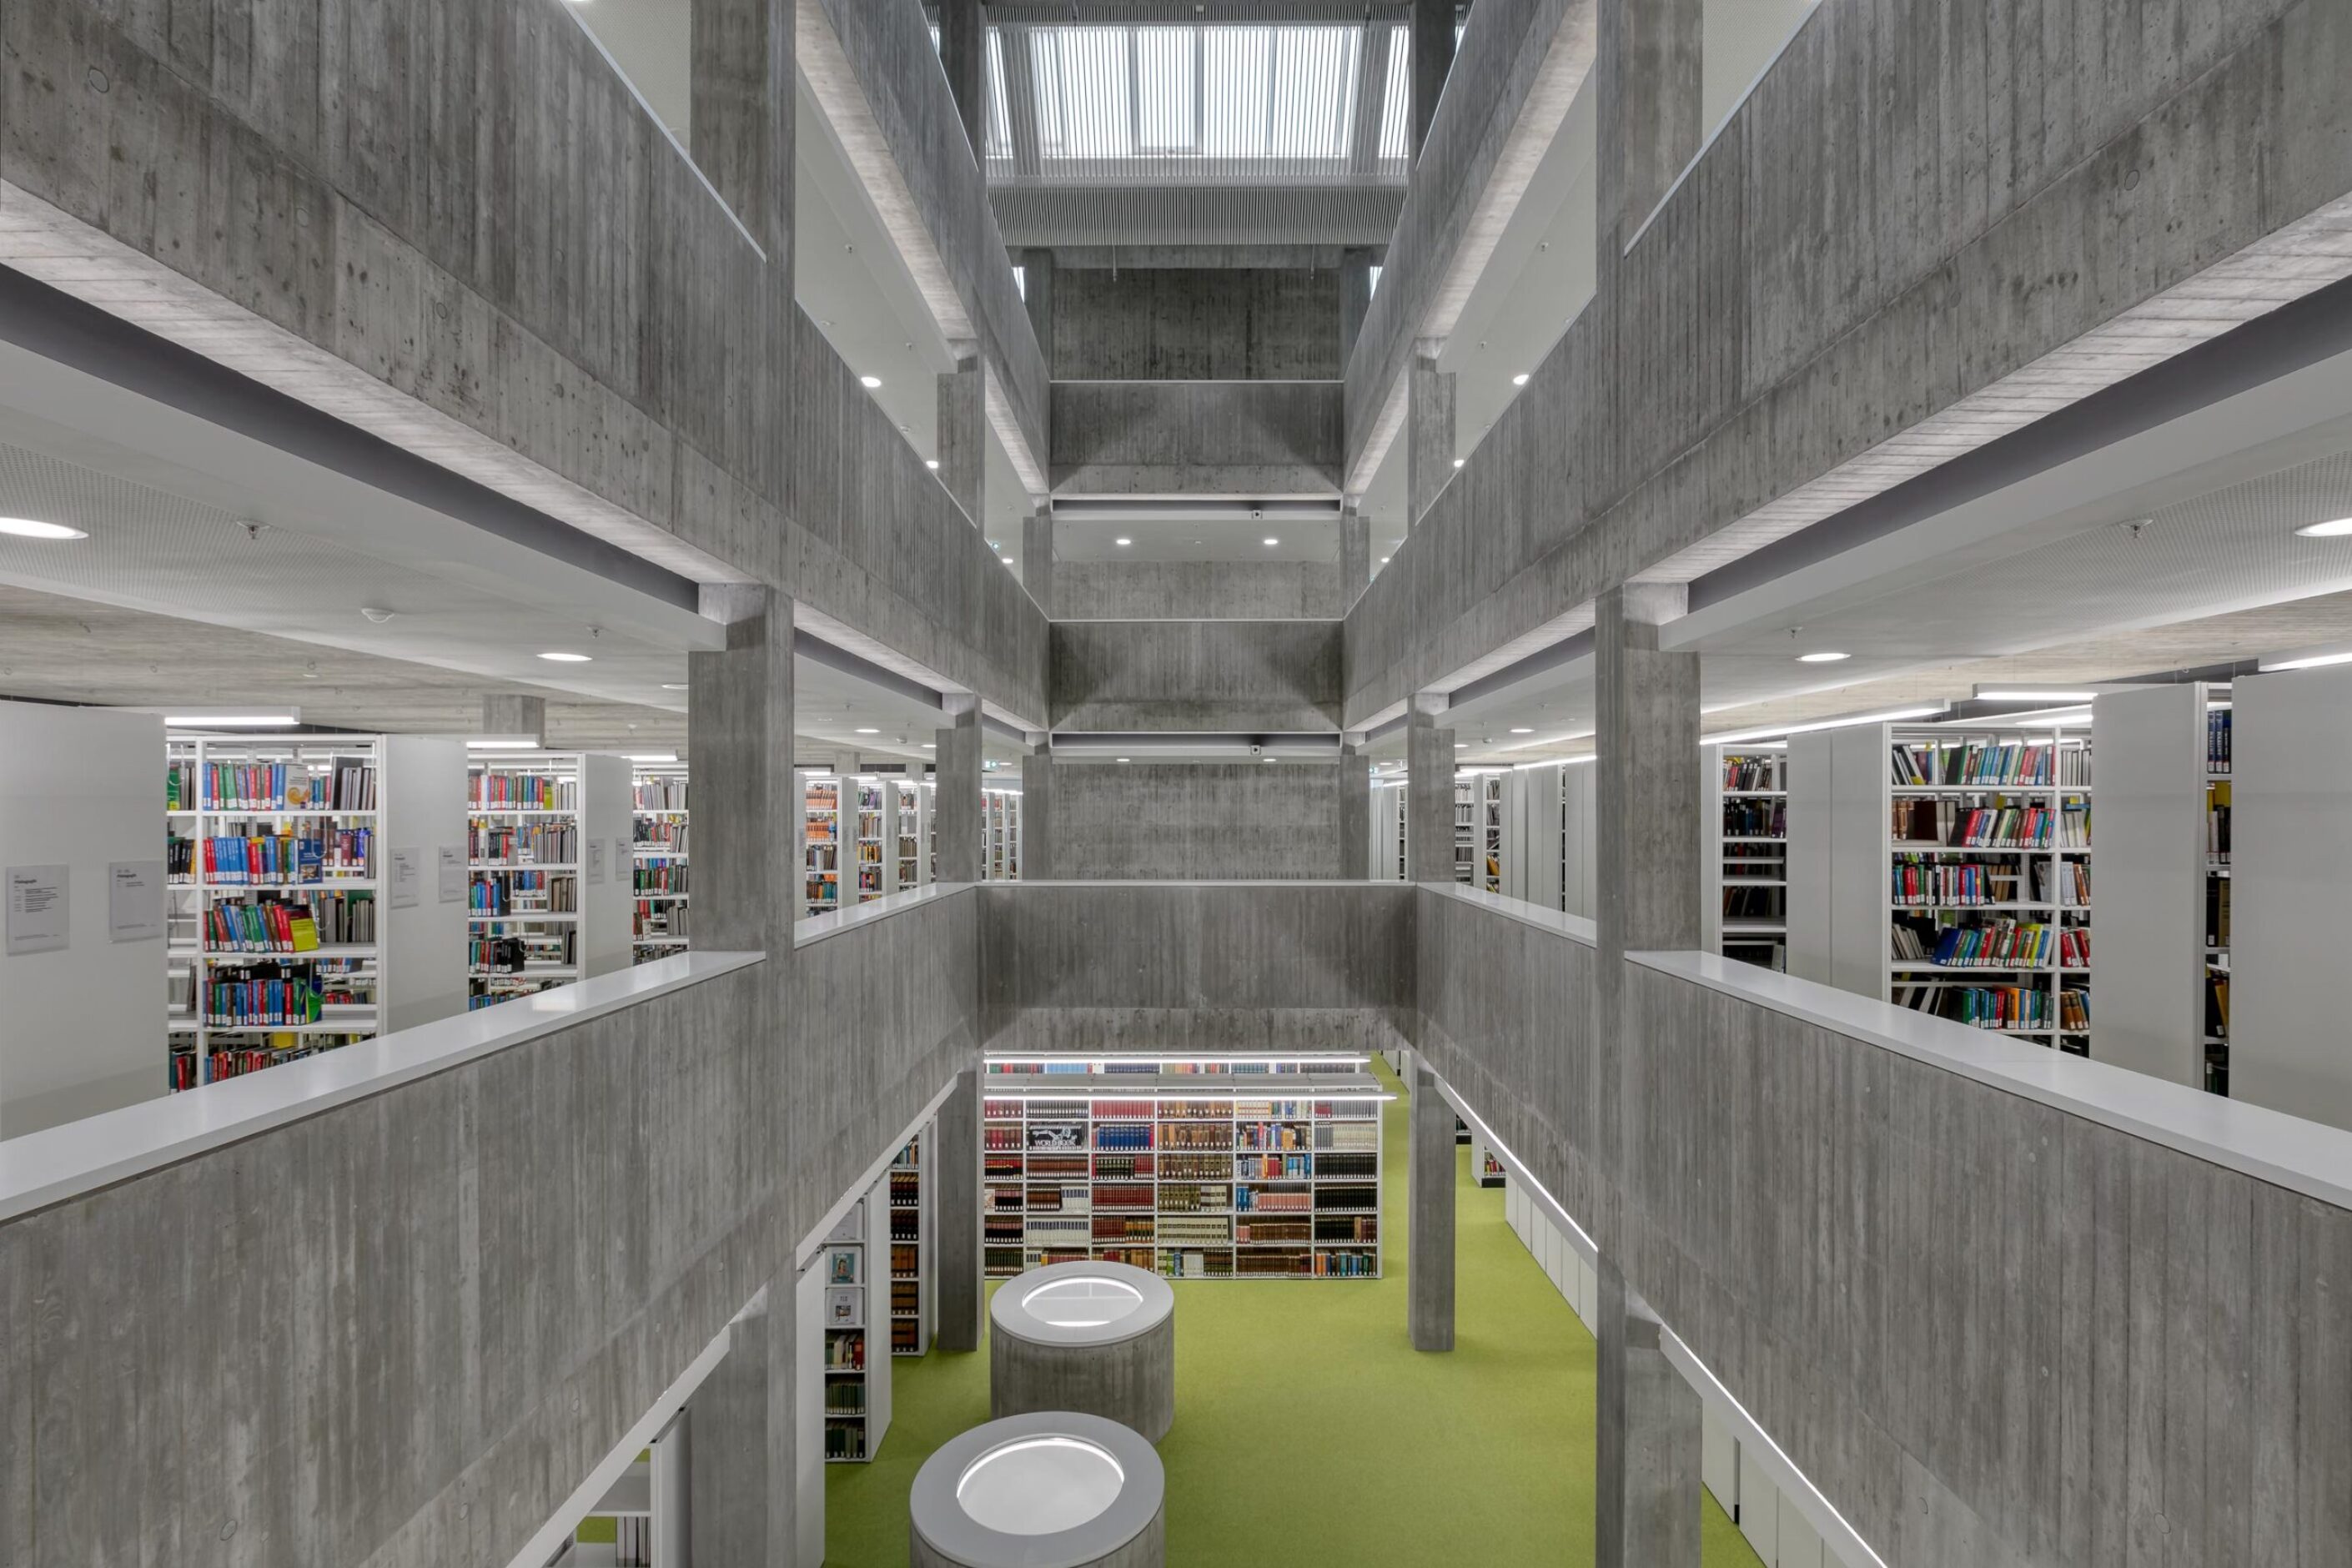 Württemberg State Library │ feco system partition walls │ system walls are acoustically decoupled